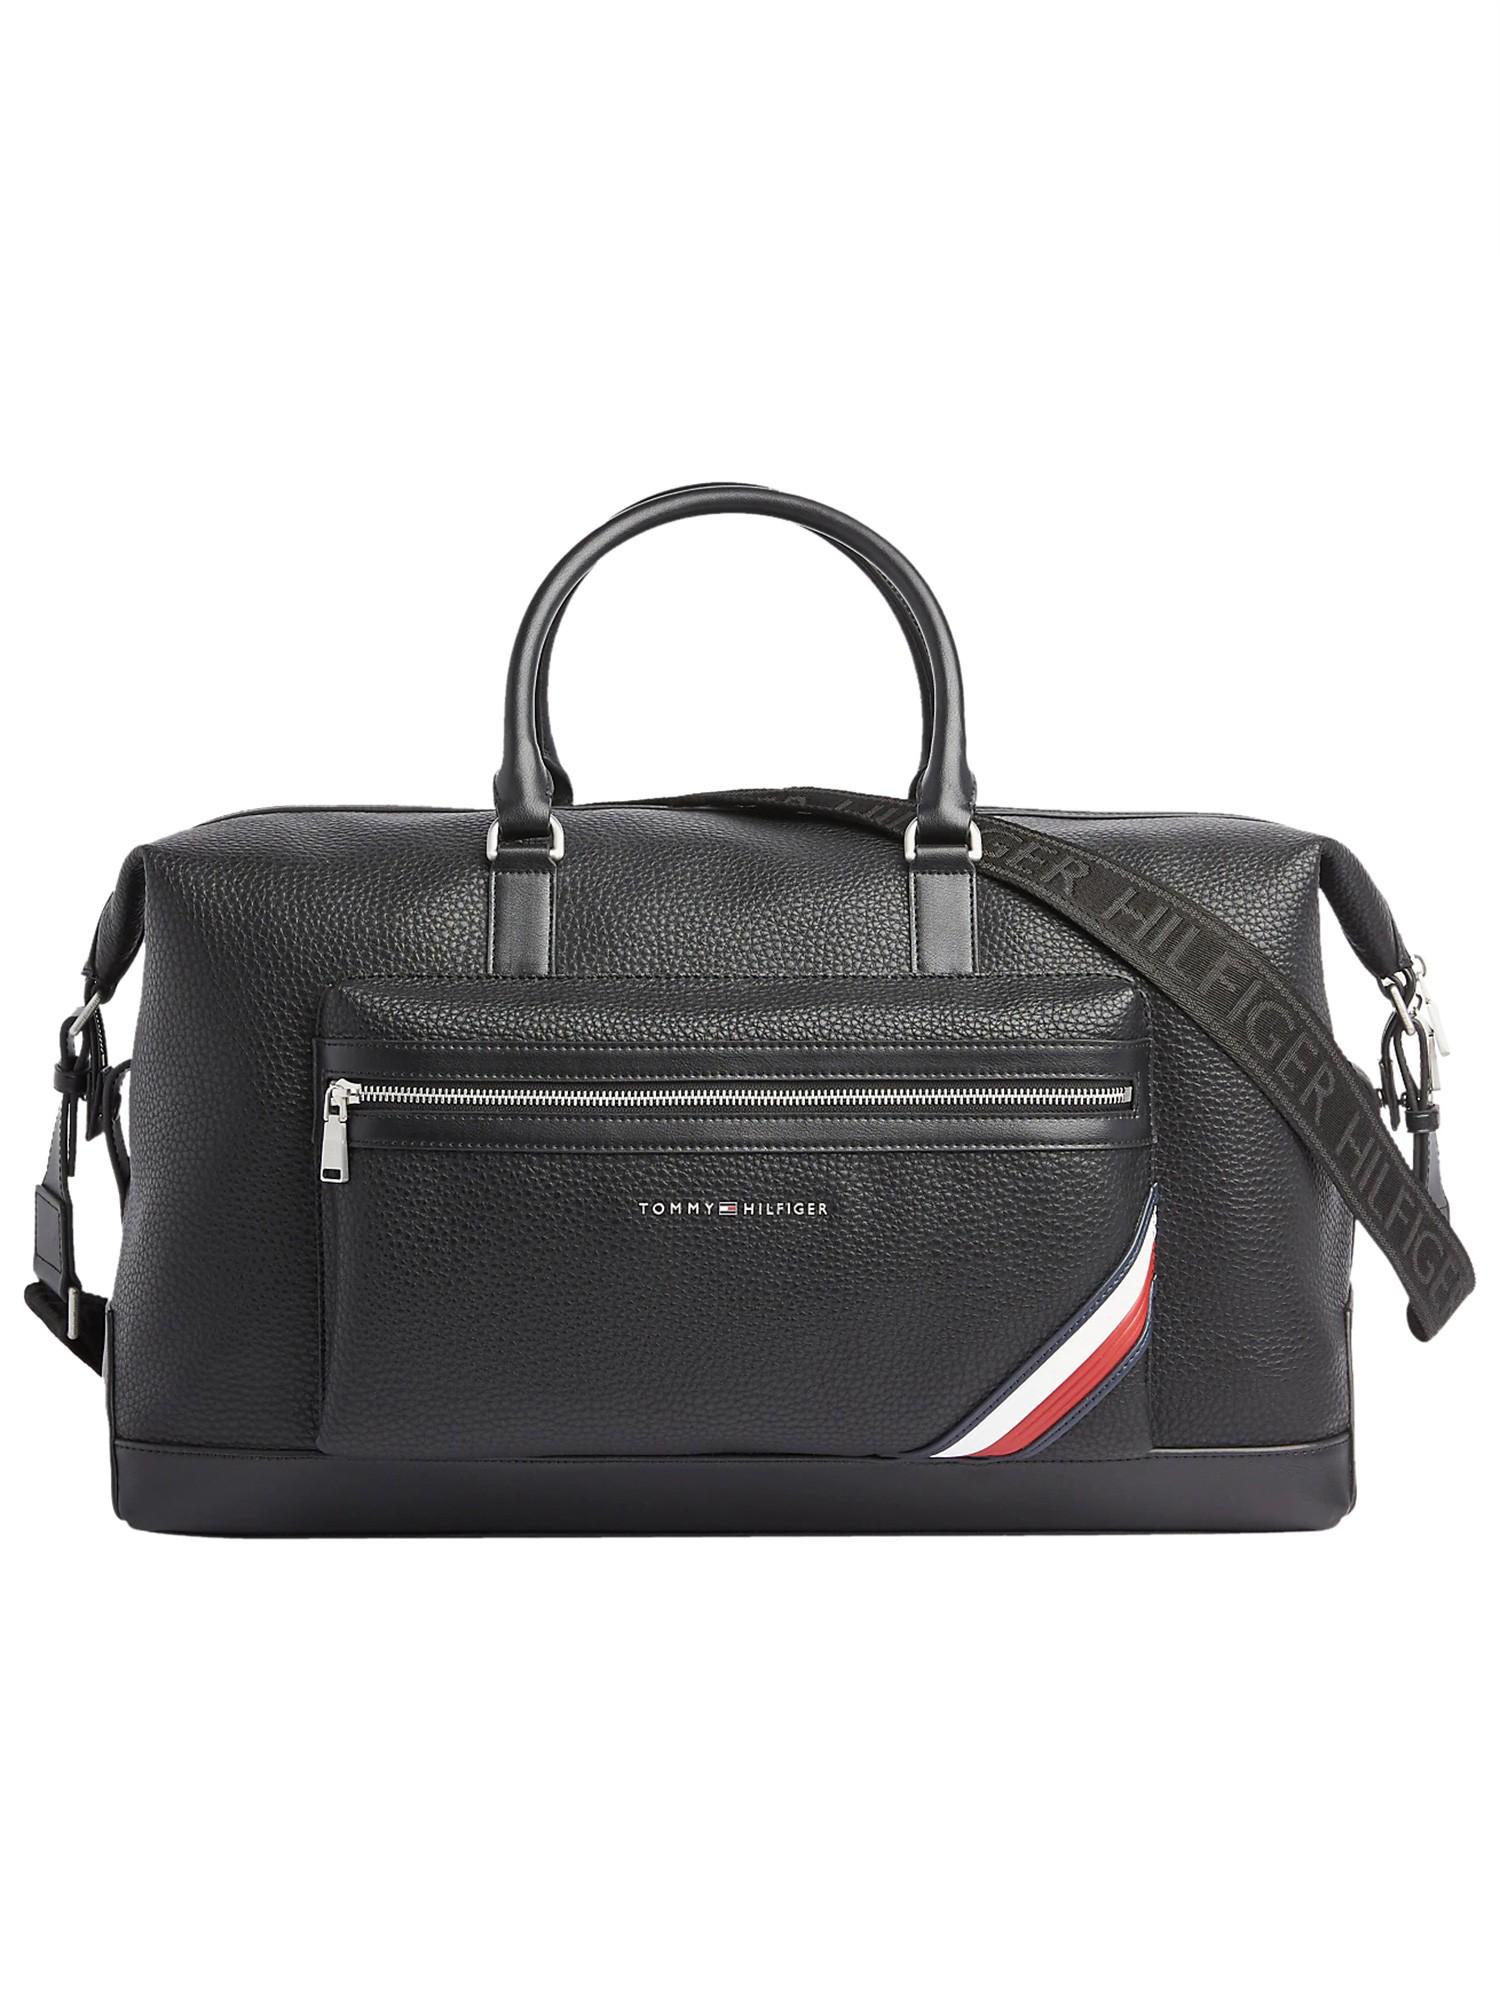 Tommy Hilfiger Downtown Duffle Bag in Black for Men - Lyst